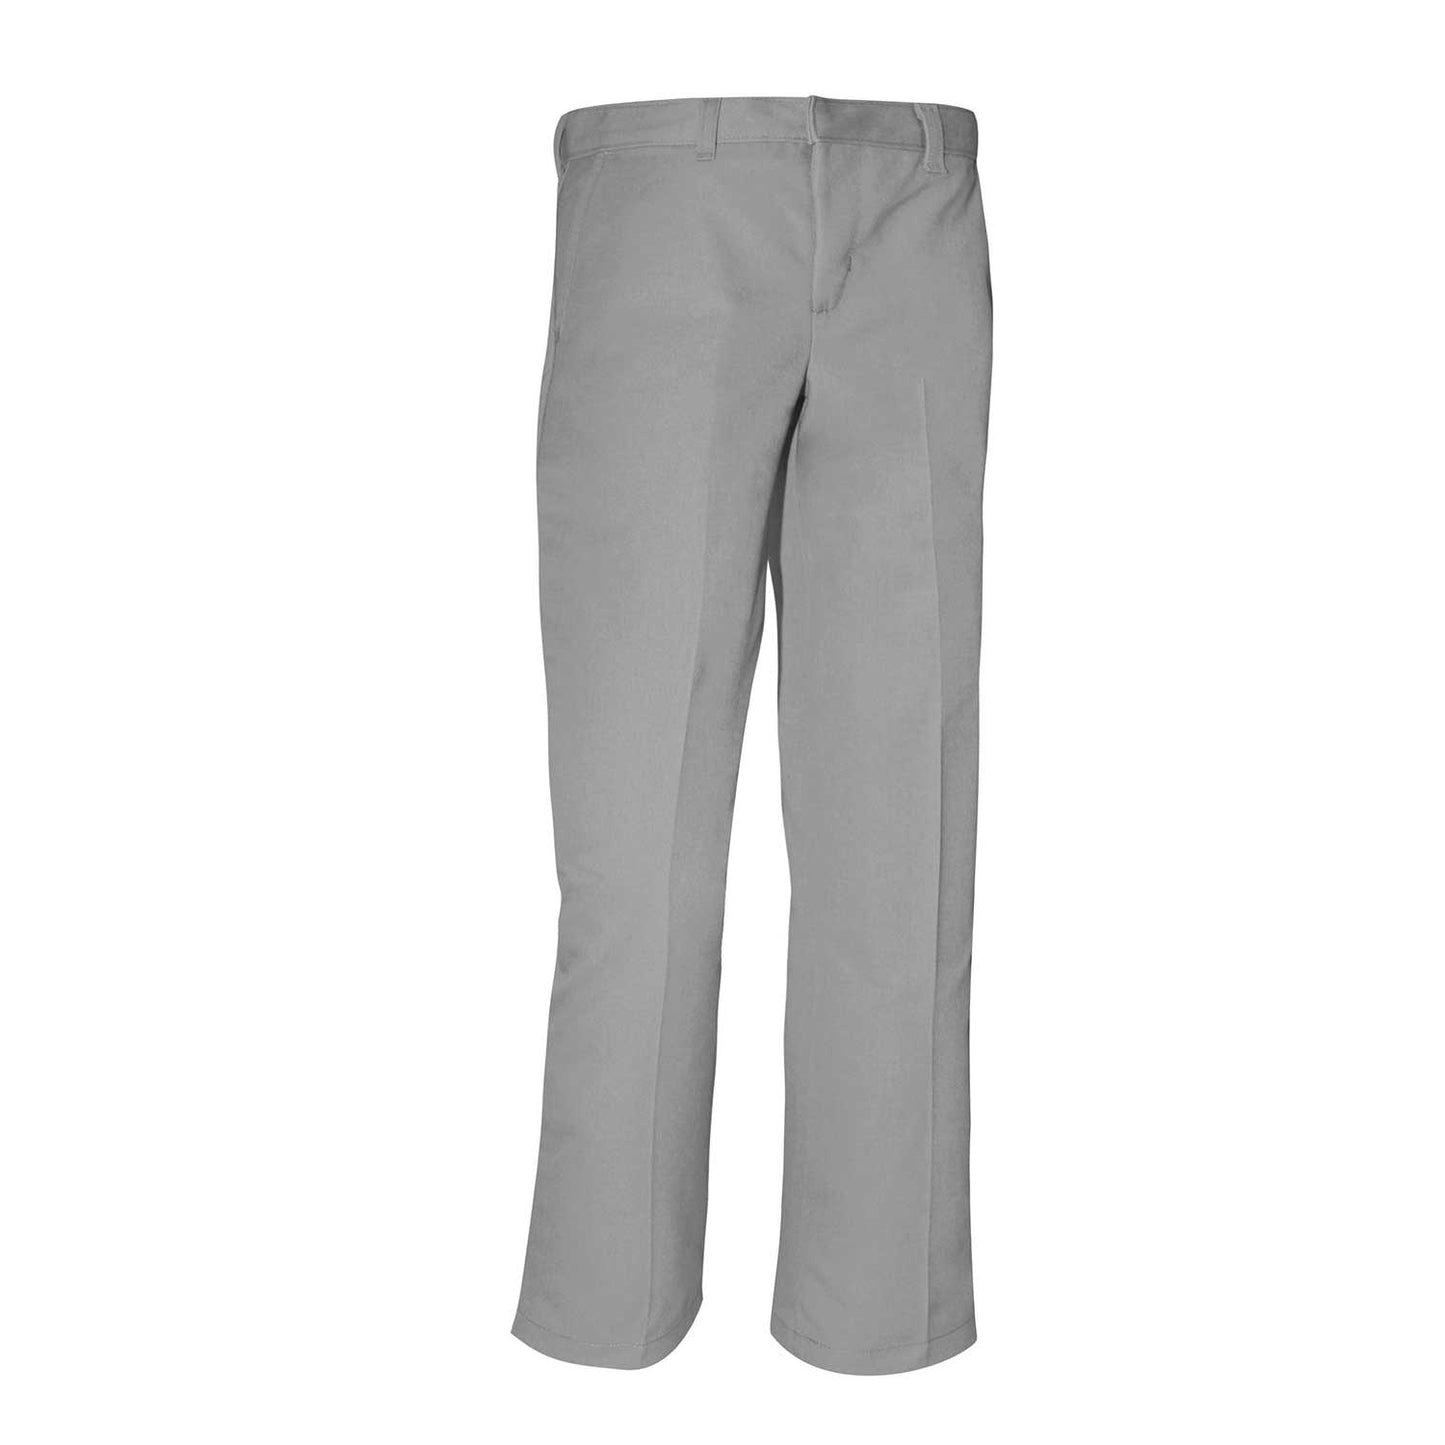 PREP & MEN FLAT FRONT PANT - (REQUIRED)